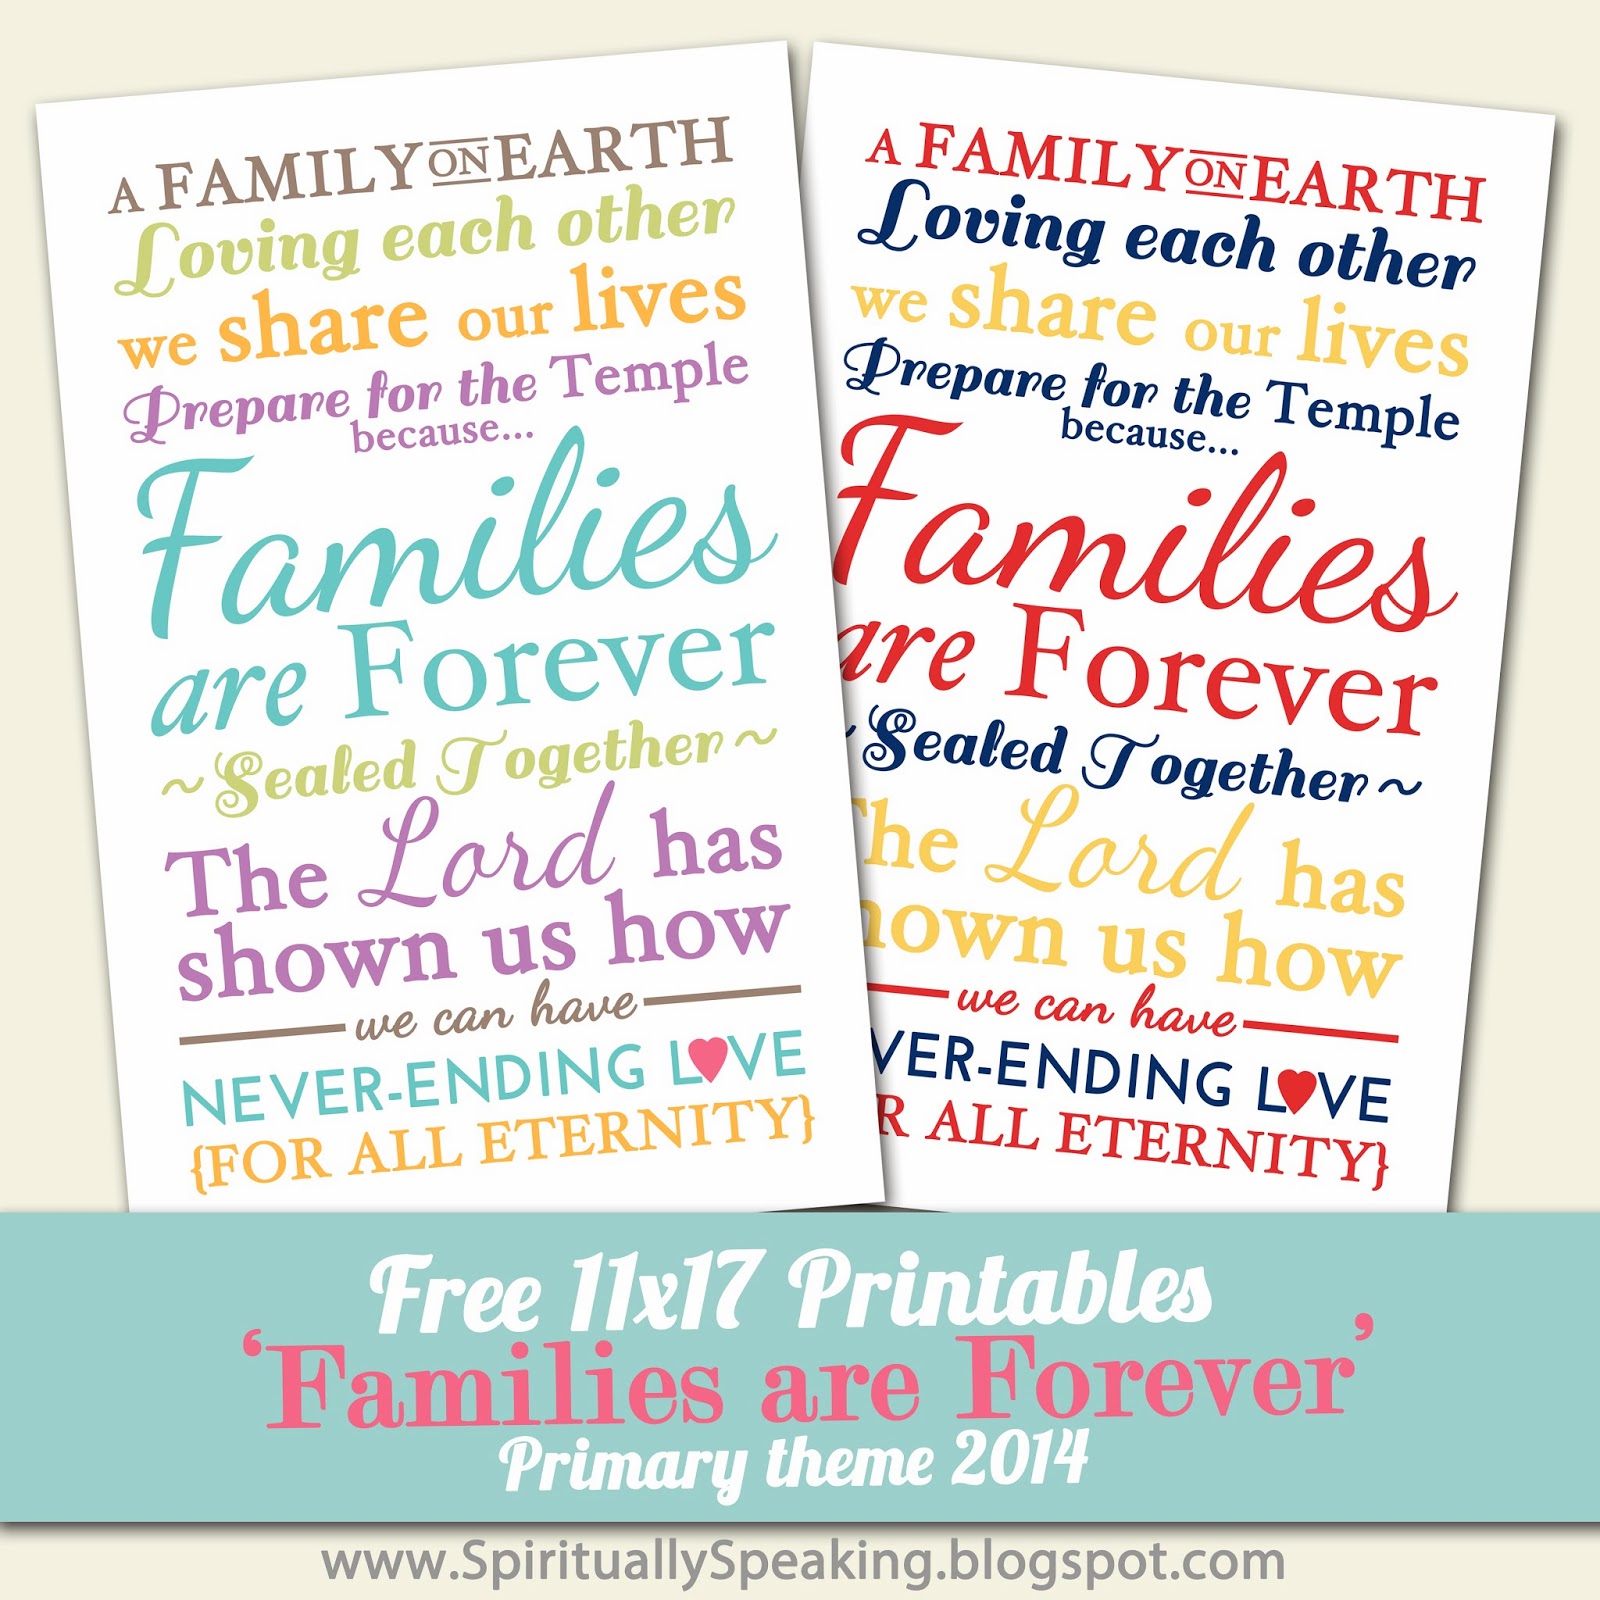 and-spiritually-speaking-families-are-forever-free-11x17-printables